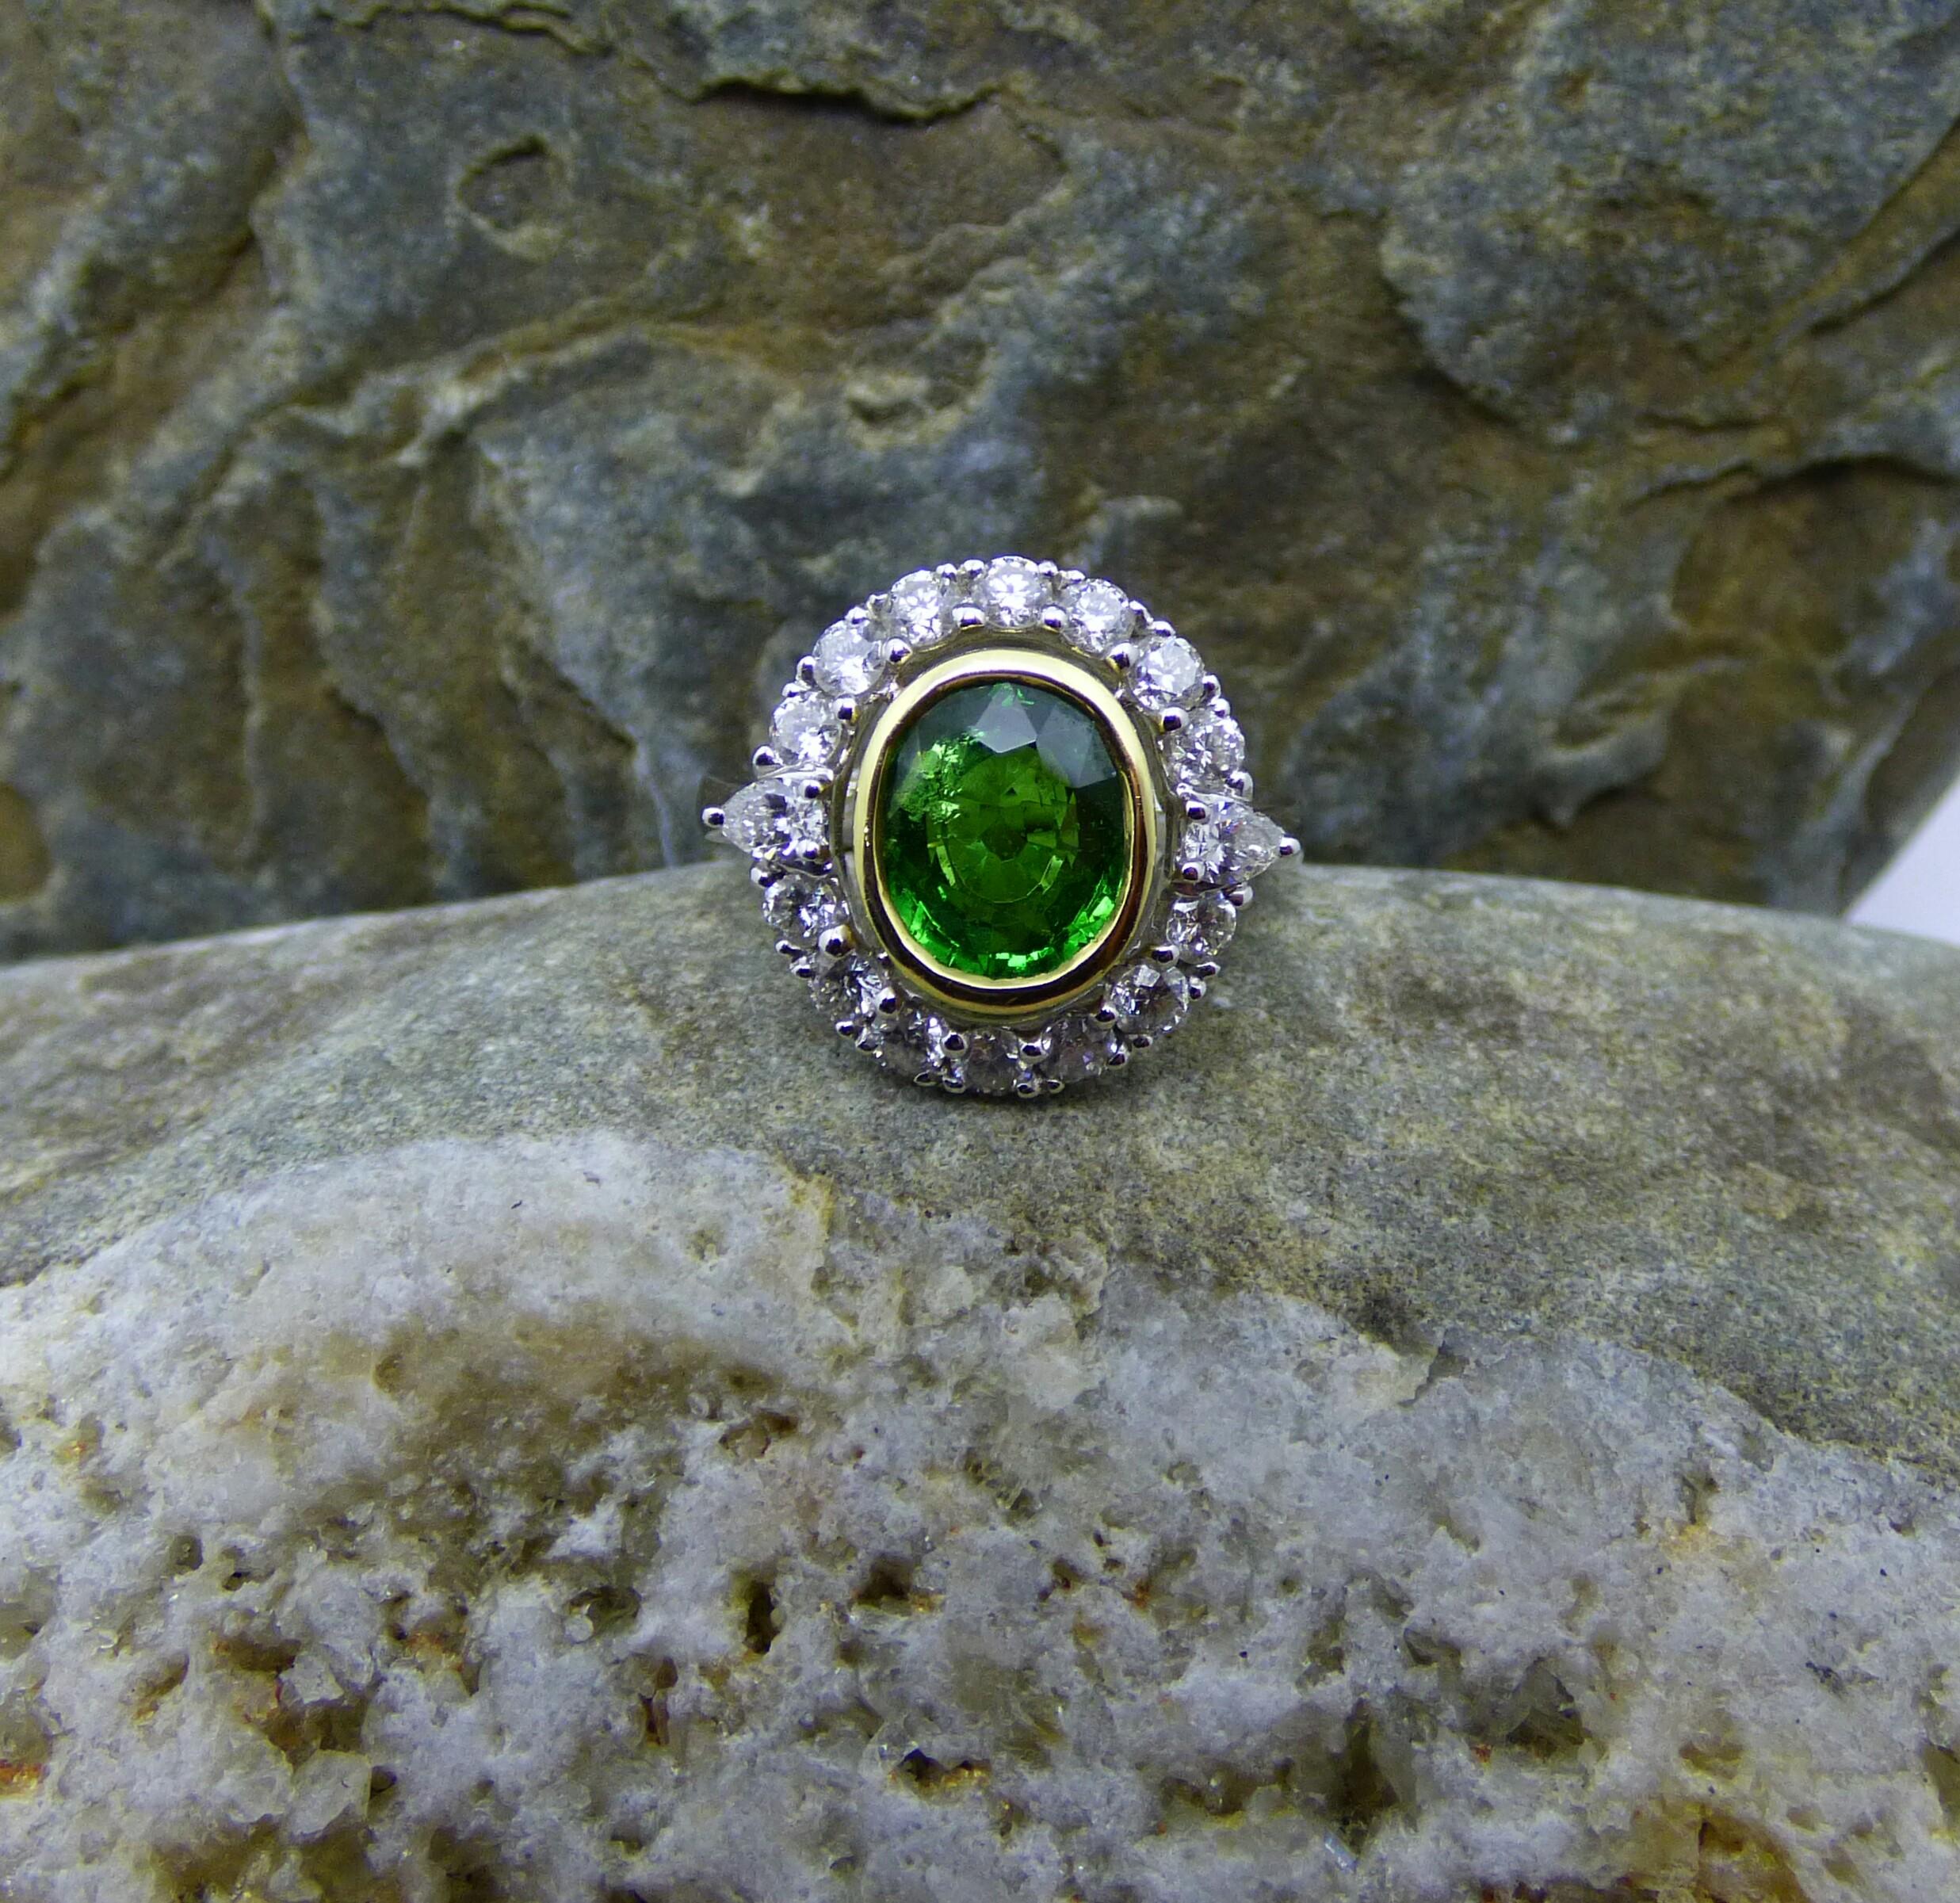 A very bright and colourful 8.12 ct oval Tsavorite Garnet makes this ring pop. The 9X7mm Garnet is surrounded by 14 round Diamonds with a total weight of .92ct and a pear shaped Diamond on each side with a total weight of .17ct.  The total size of